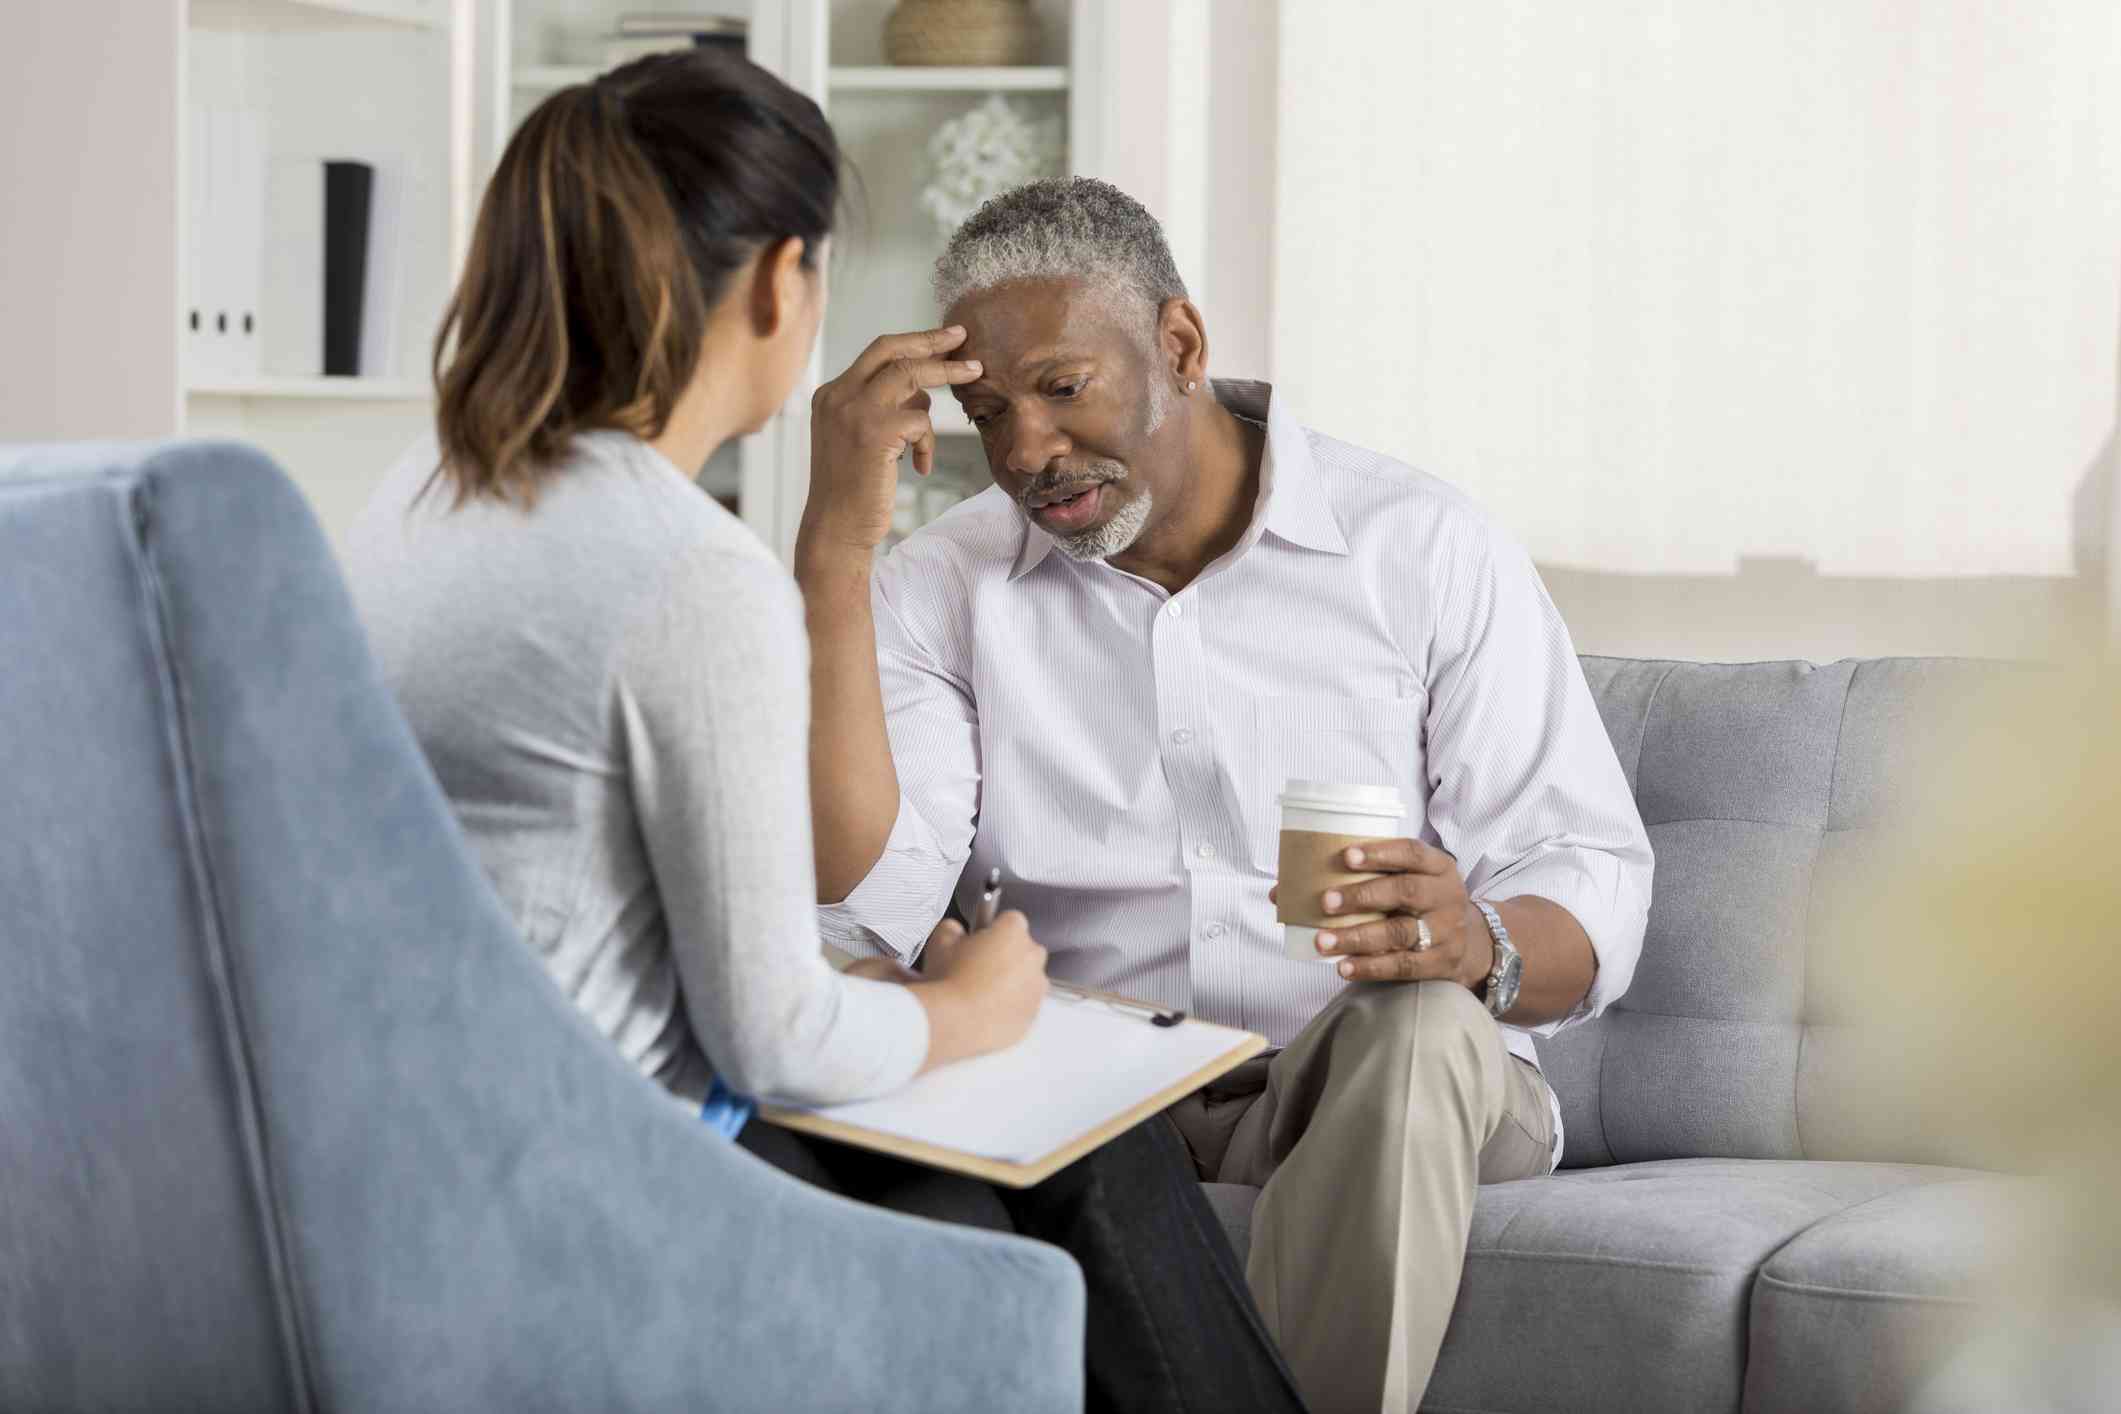 A middle aged man looks worried as he sits on a couch with a to-go cup of coffee in his hand and talks to the female therapist sitting across form him.